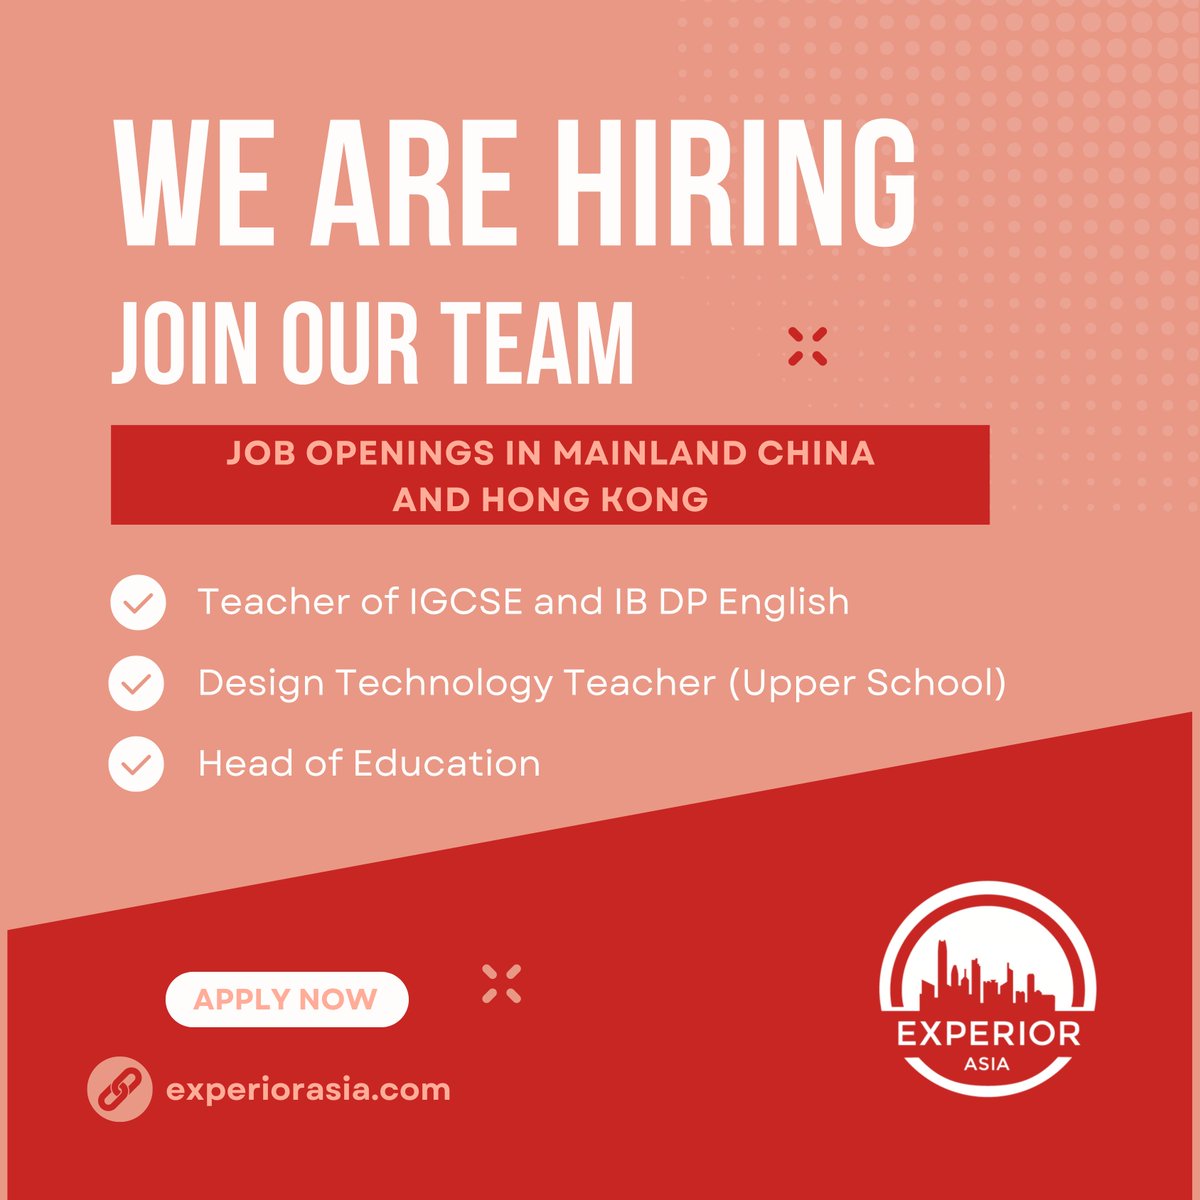 🌟 Exciting news! We're hiring for multiple education positions in both mainland China and Hong Kong. Visit our website today to see all of our job openings and apply now! 🇨🇳🇭🇰 

#jobopportunities #teachabroad #vacancy #internationalopportunities